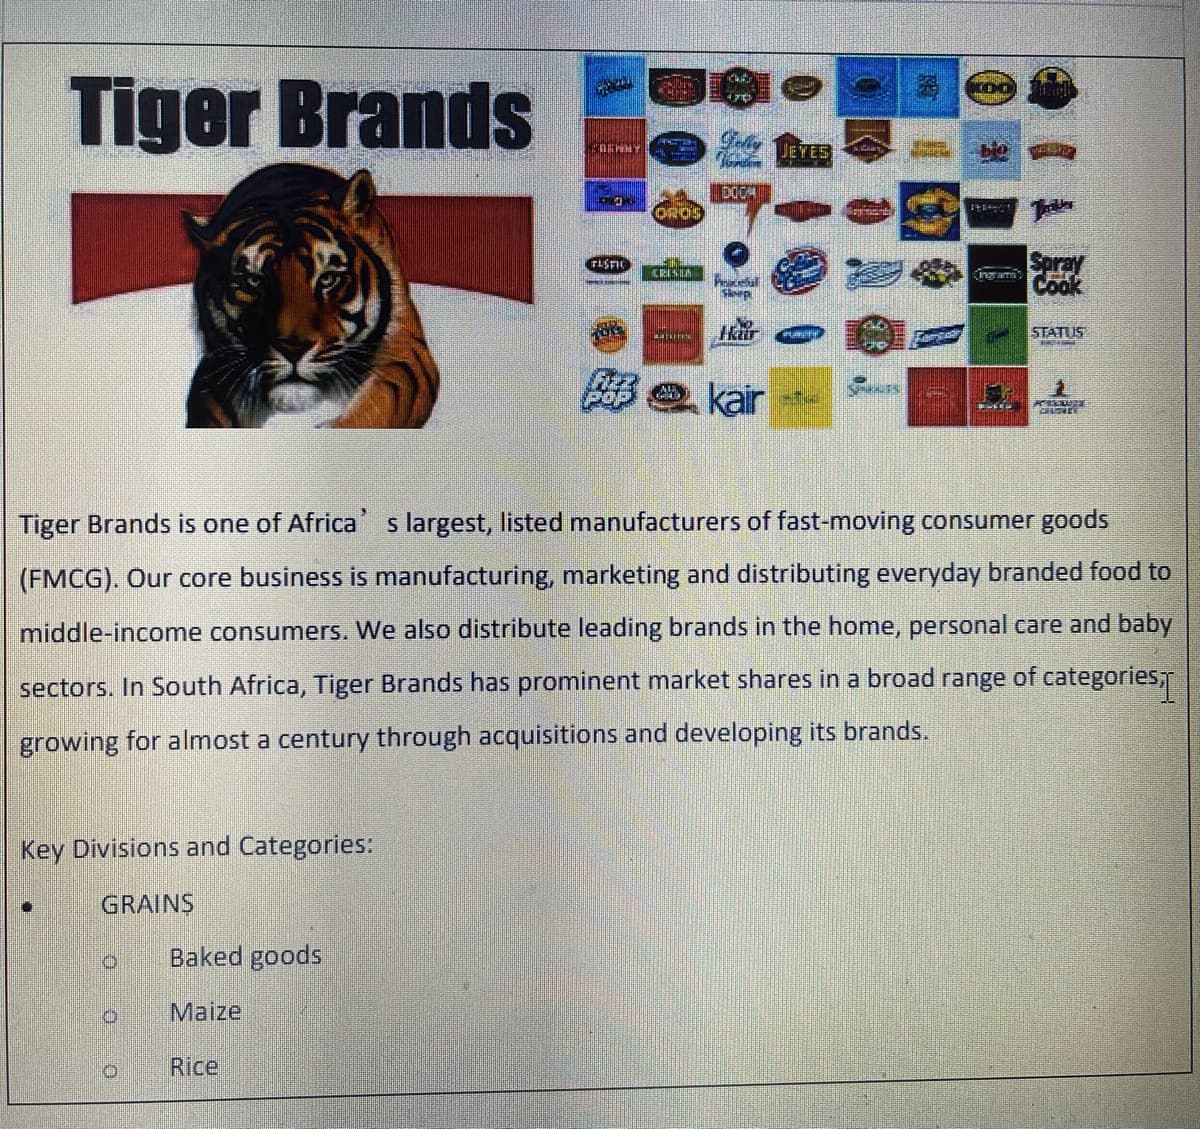 Tiger Brands
Key Divisions and Categories:
GRAINS
O
0
Baked goods
Maize
BENNY
Rice
O
TUSTIC
TORS
OROS
CRISIA
DOCA
Peaceful
Skop
Har
kair
JEYES
RAD
SPRACTS
KOO
Ingram
Tiger Brands is one of Africa's largest, listed manufacturers of fast-moving consumer goods
(FMCG). Our core business is manufacturing, marketing and distributing everyday branded food to
middle-income consumers. We also distribute leading brands in the home, personal care and baby
sectors. In South Africa, Tiger Brands has prominent market shares in a broad range of categories,
growing for almost a century through acquisitions and developing its brands.
Fiber
Spray
Cook
STATUS
KESKUZE
CHOLE